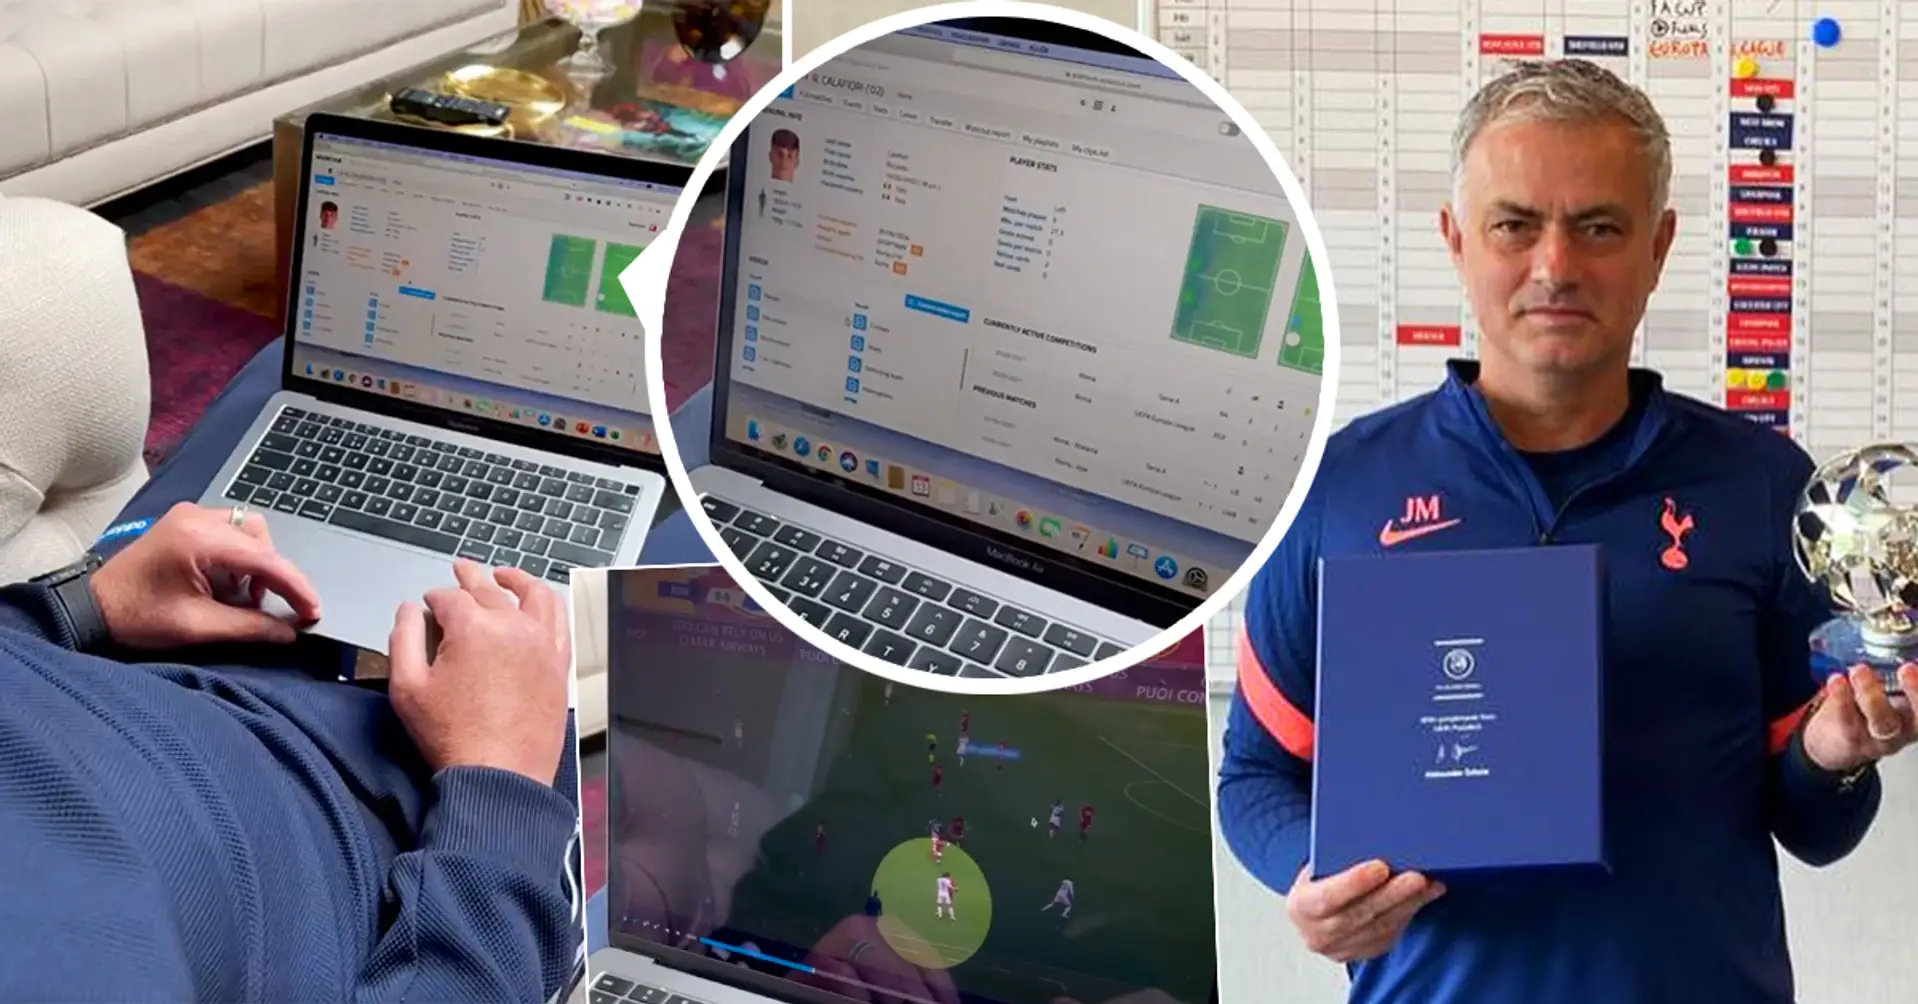 Mourinho’s secrets. Jose reveals how he studies players using scouting software on his laptop